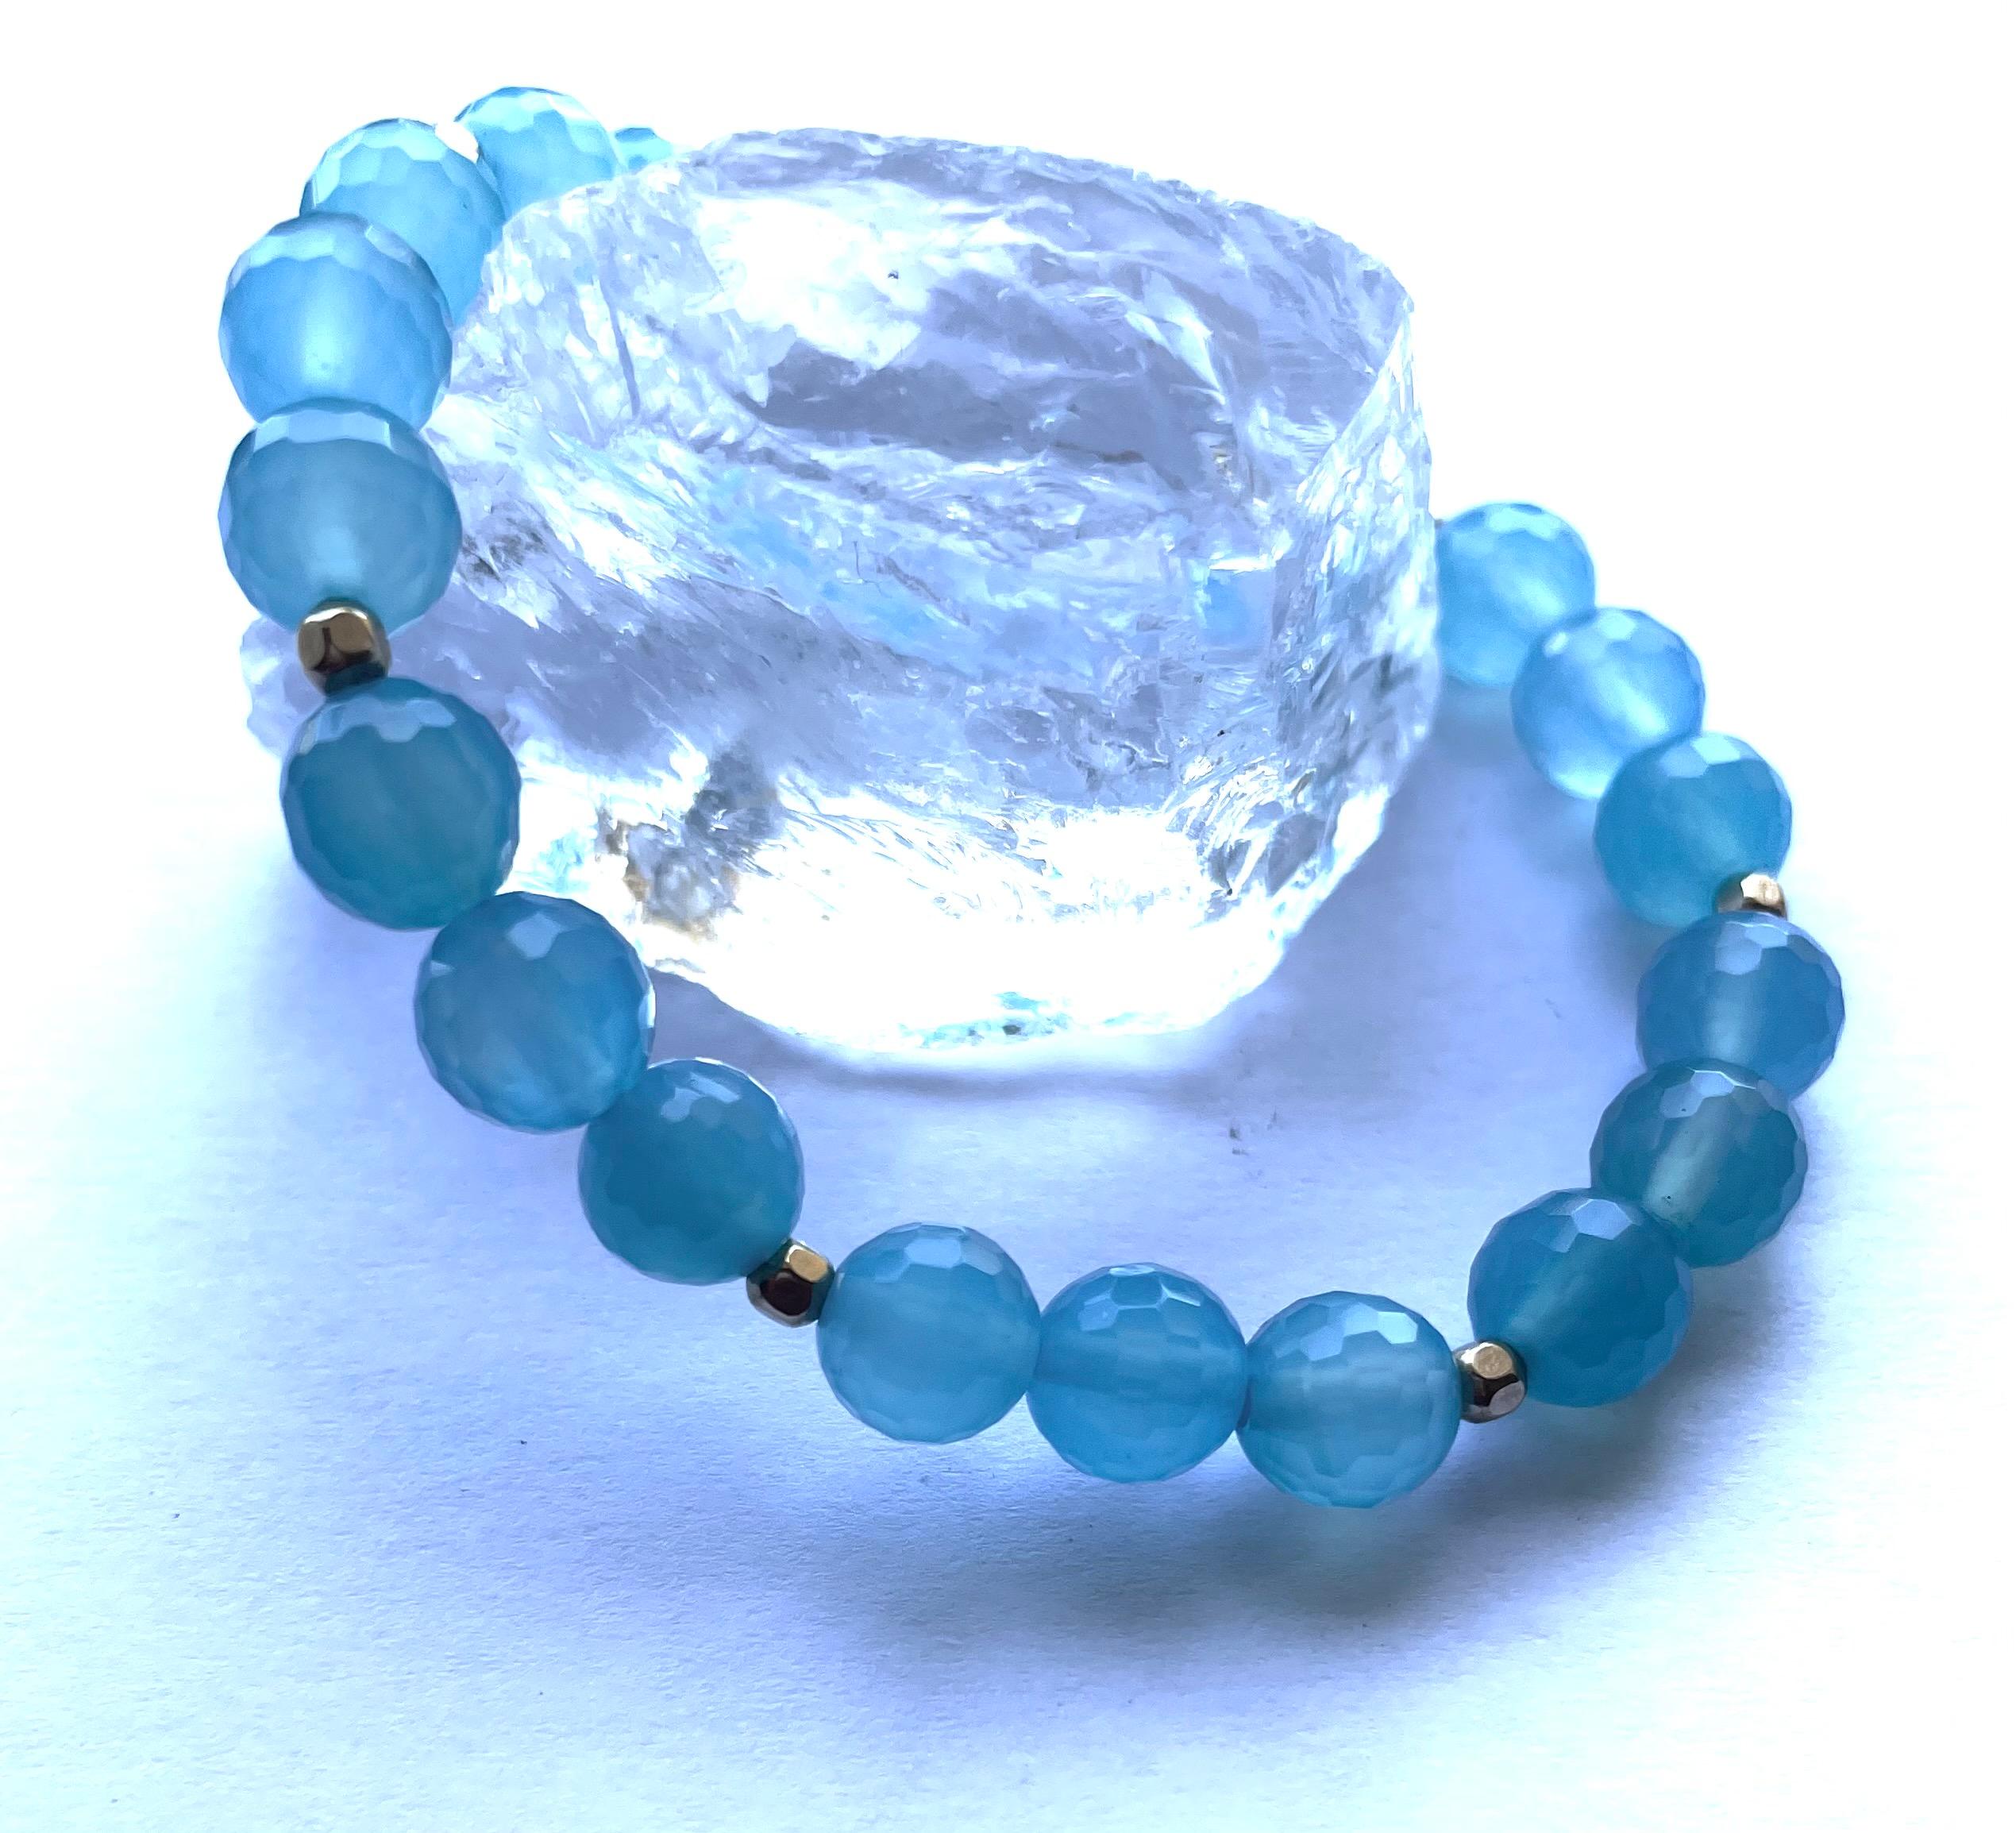 Description
Sea Blue Chalcedony quartz with gold filled faceted balls stretchy bracelet.
Item # B1328. 
Buy 2 bracelets and stack them for a more exquisite look. (Price listed is for 1 bracelet only).

Materials and Weight
Chalcedony quartz 67